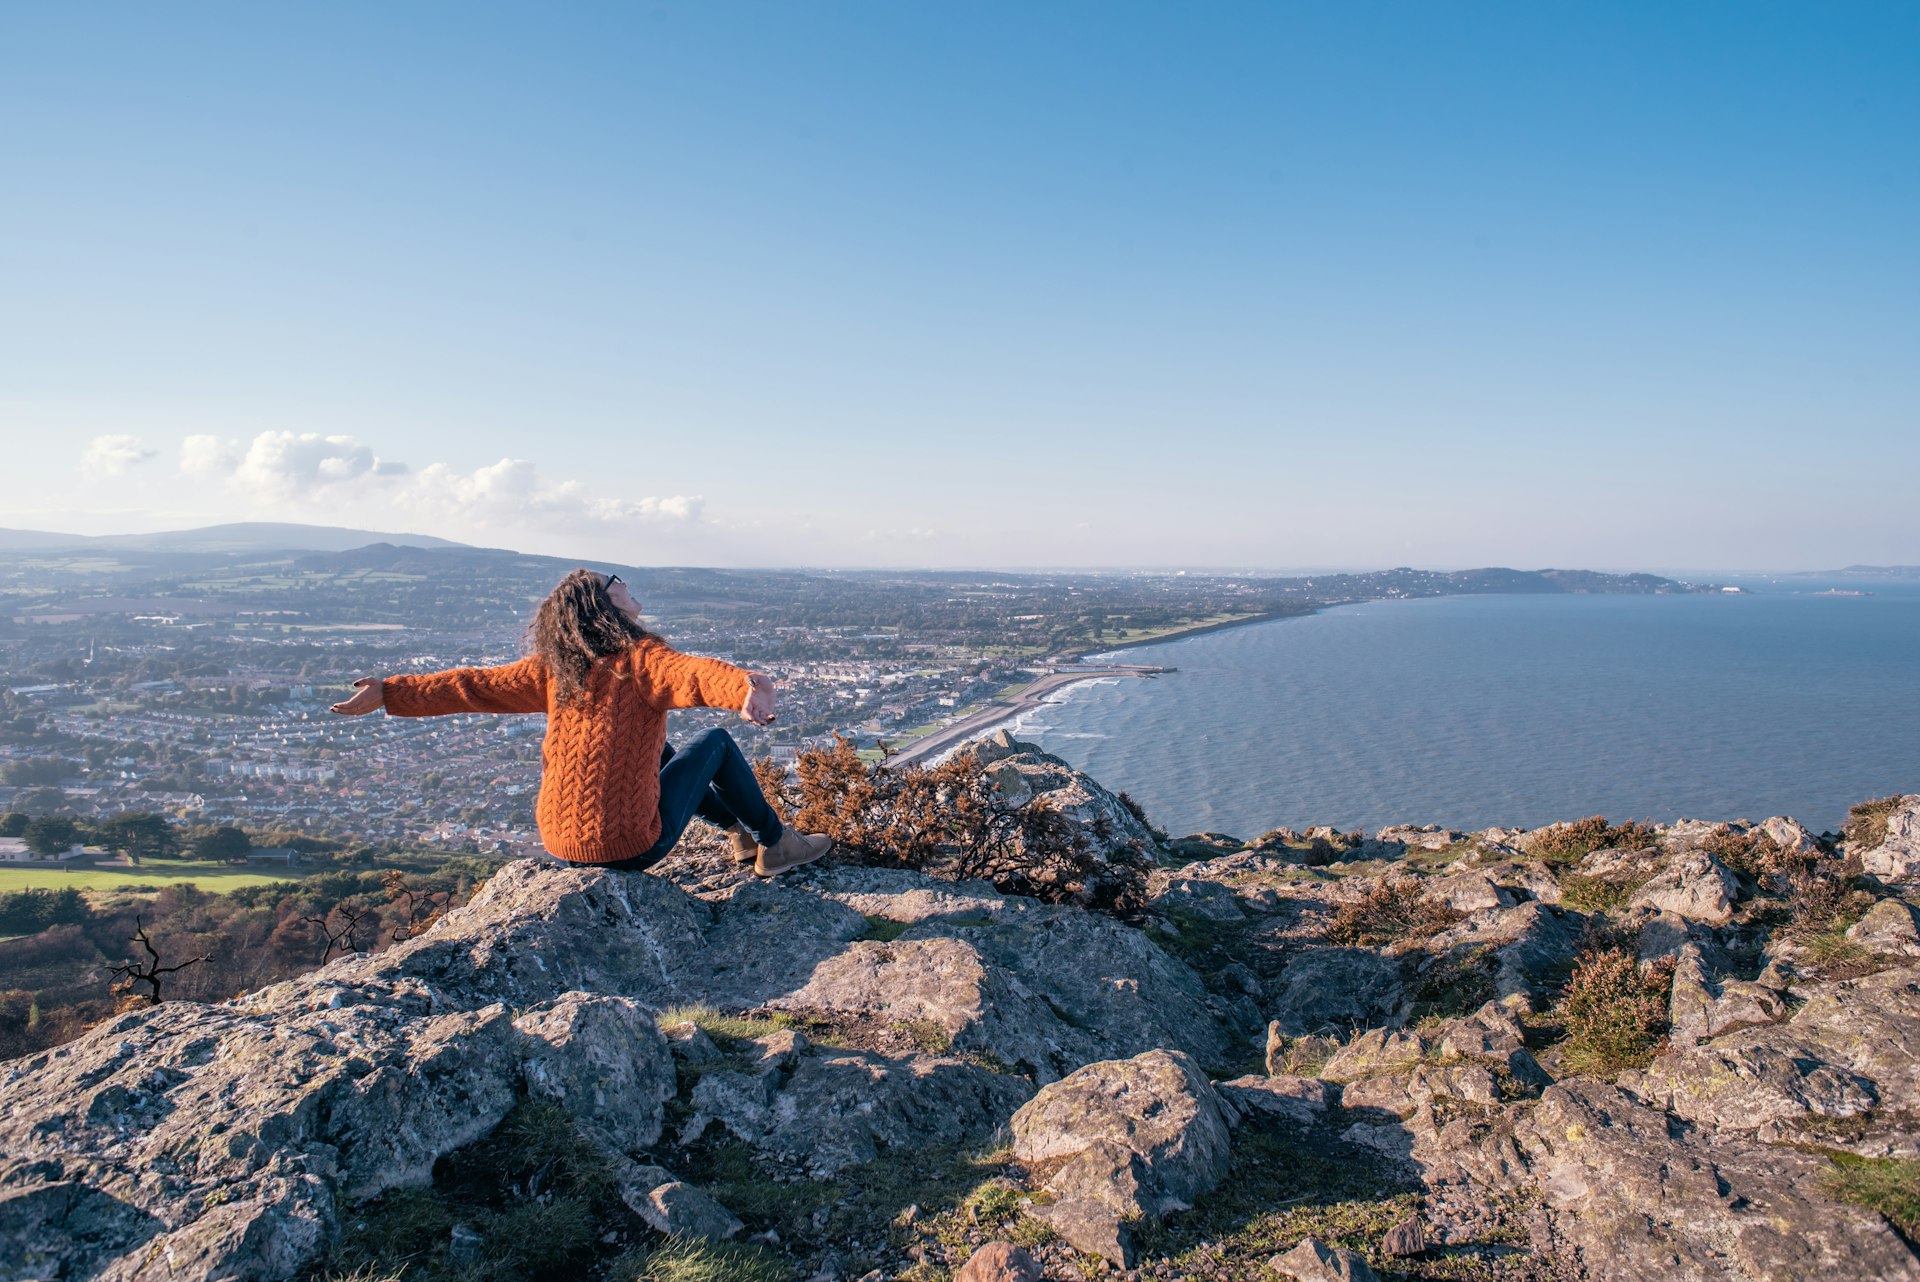 A woman sits on a rocky viewpoint above the coastline and throws her arms up in the air